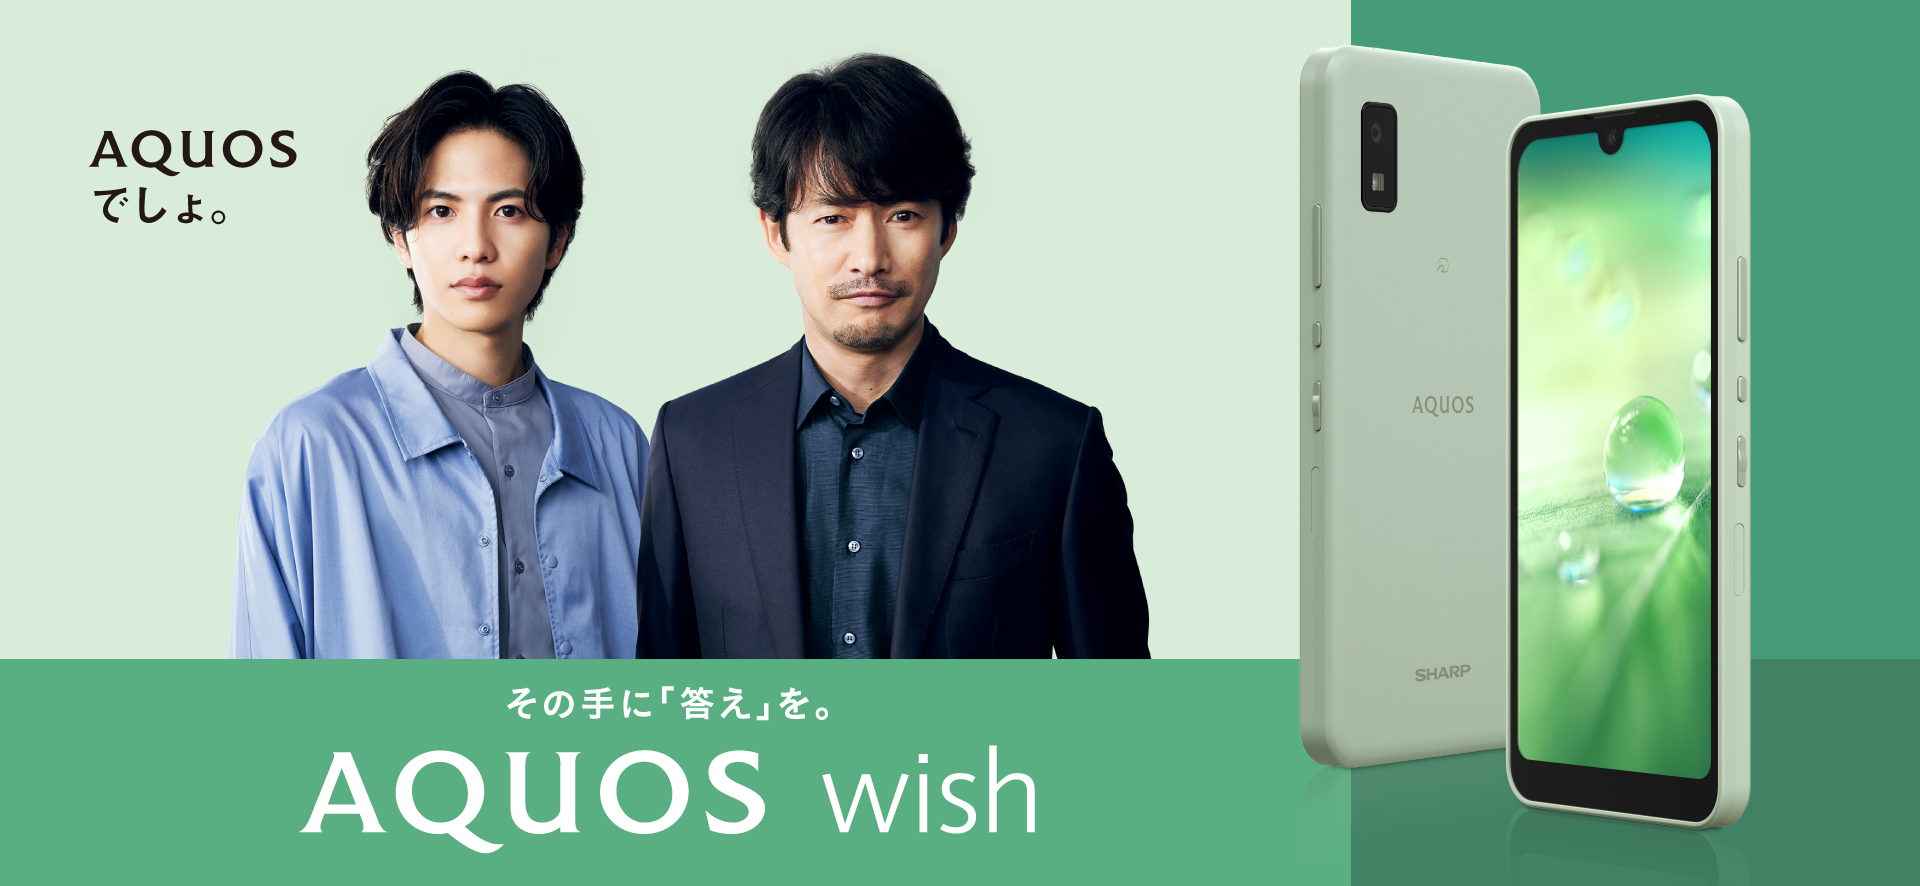 Sharp AQUOS wish is an entry-level smartphone powered by 